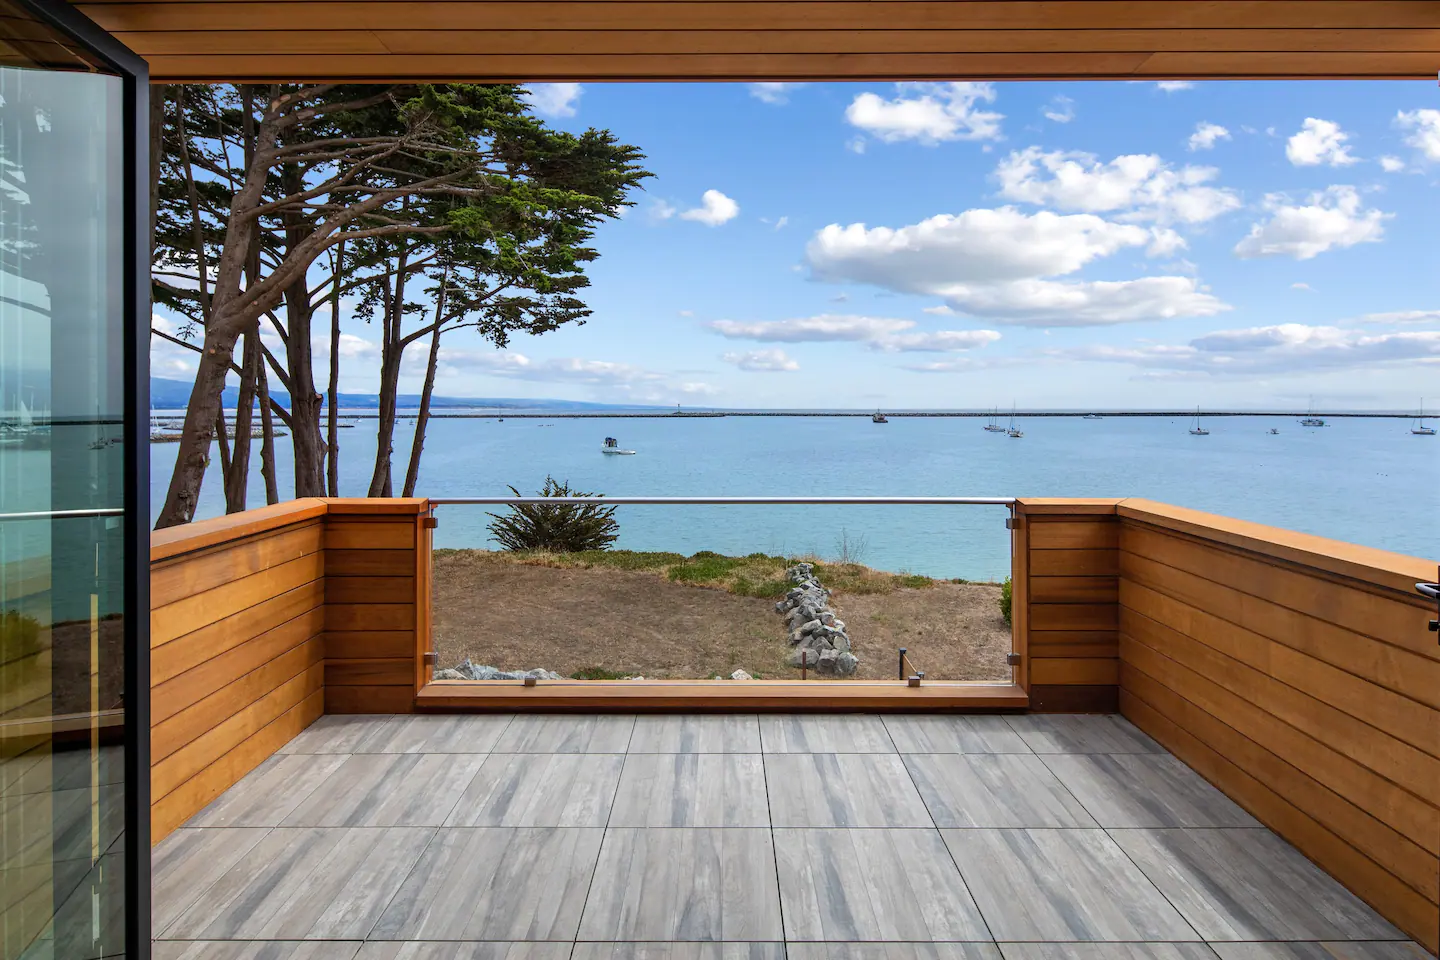 The deck has a panoramic view of the beach.